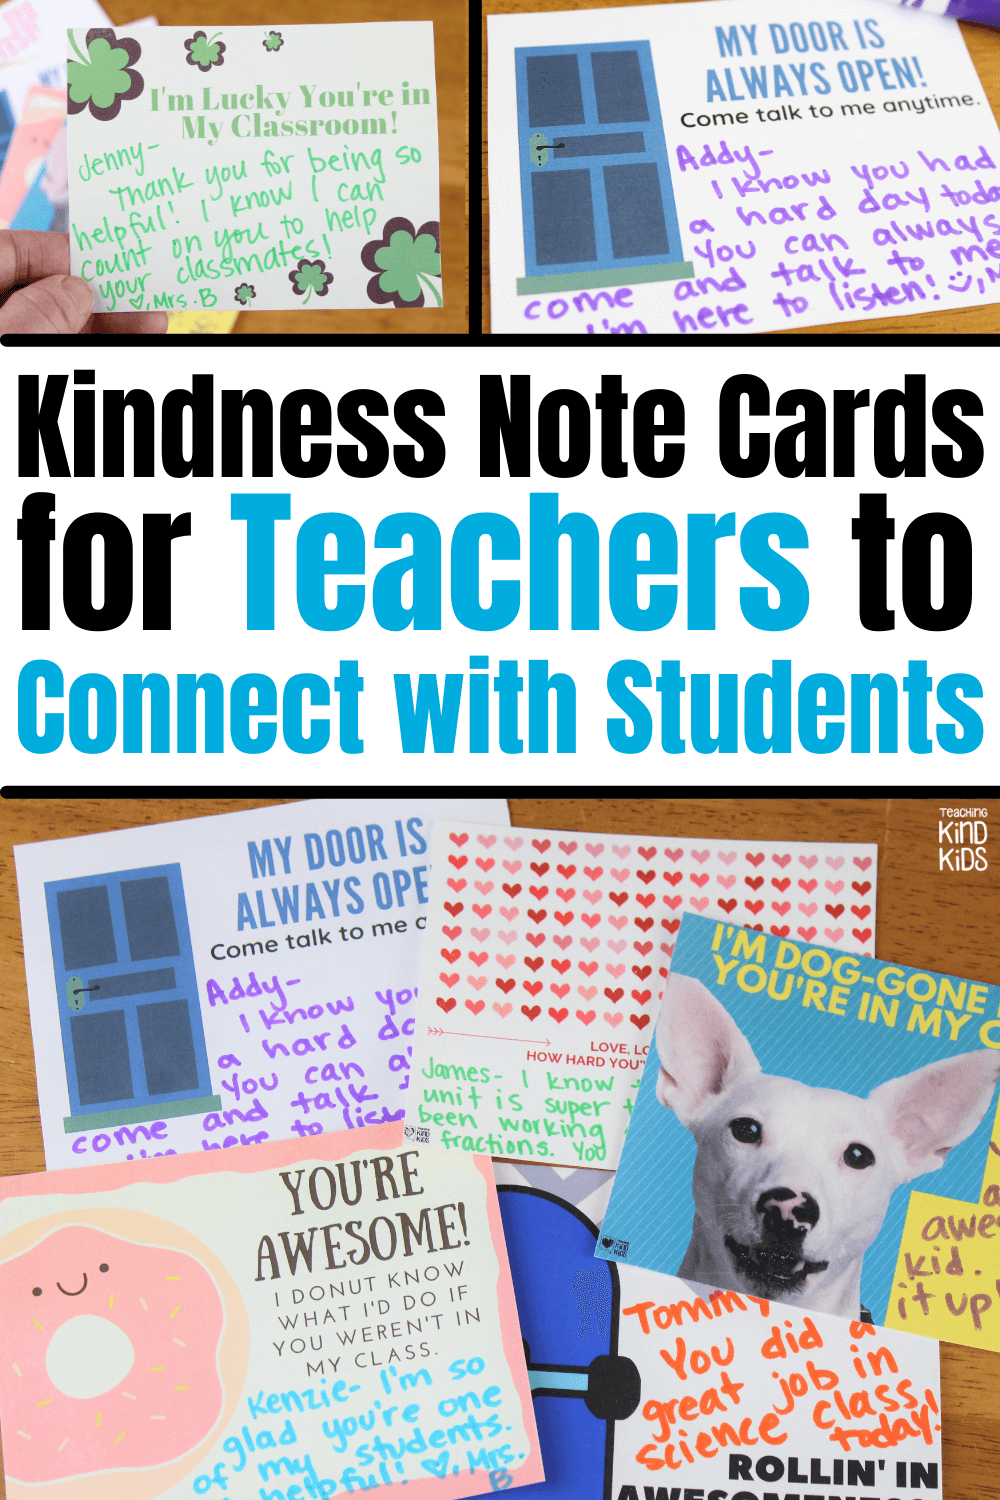 Teachers: Connect with your students and praise them for their hard work and kindness. It's a great way to connect with students in meaningful ways.